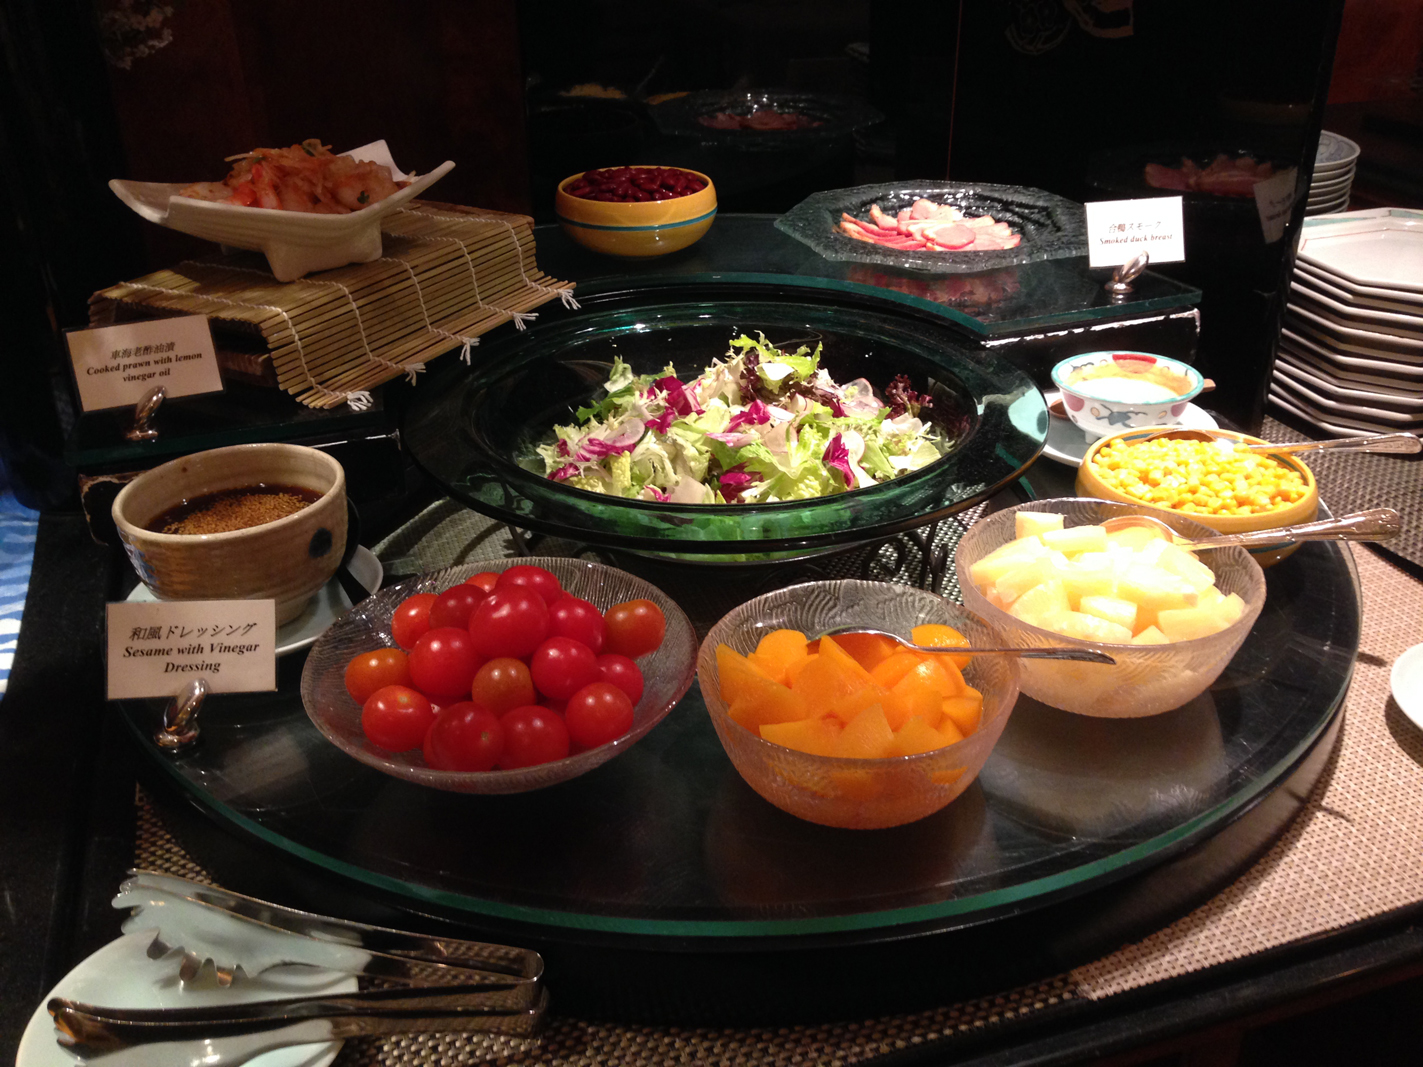 A very nice salad bar with only the freshest ingredients.